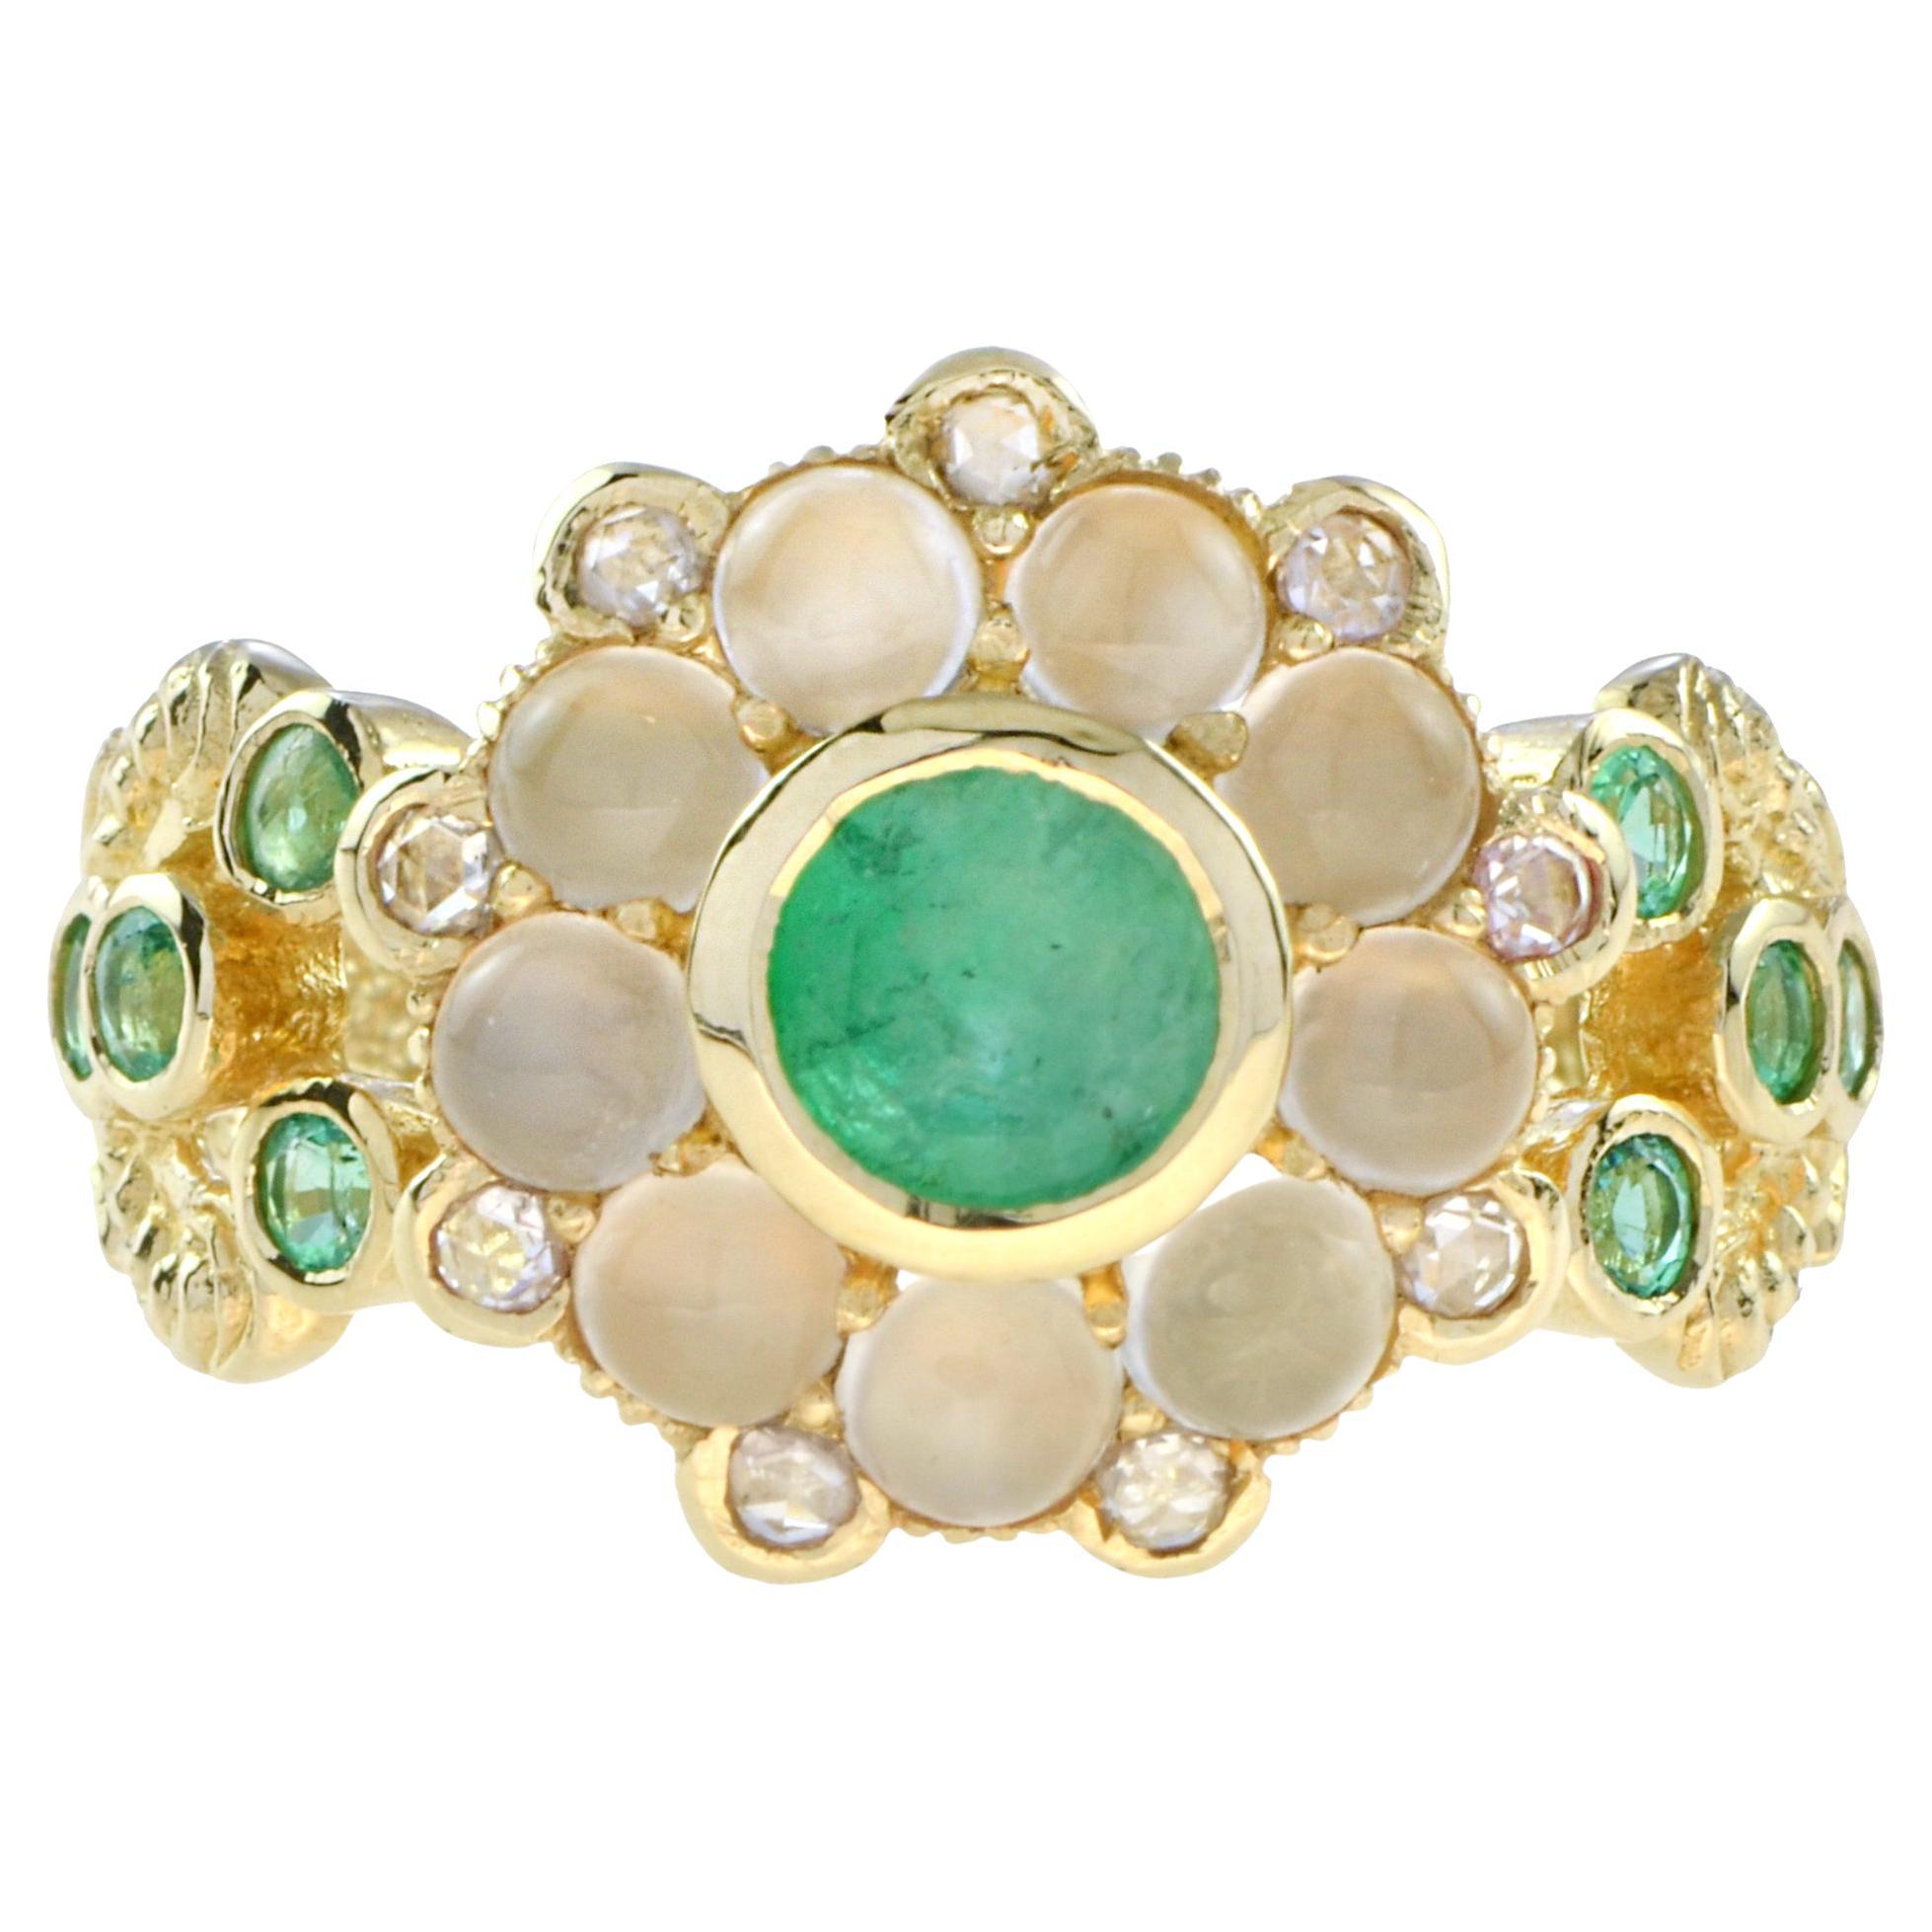 Emerald with Moonstone and Diamond Ring in 14K Yellow Gold